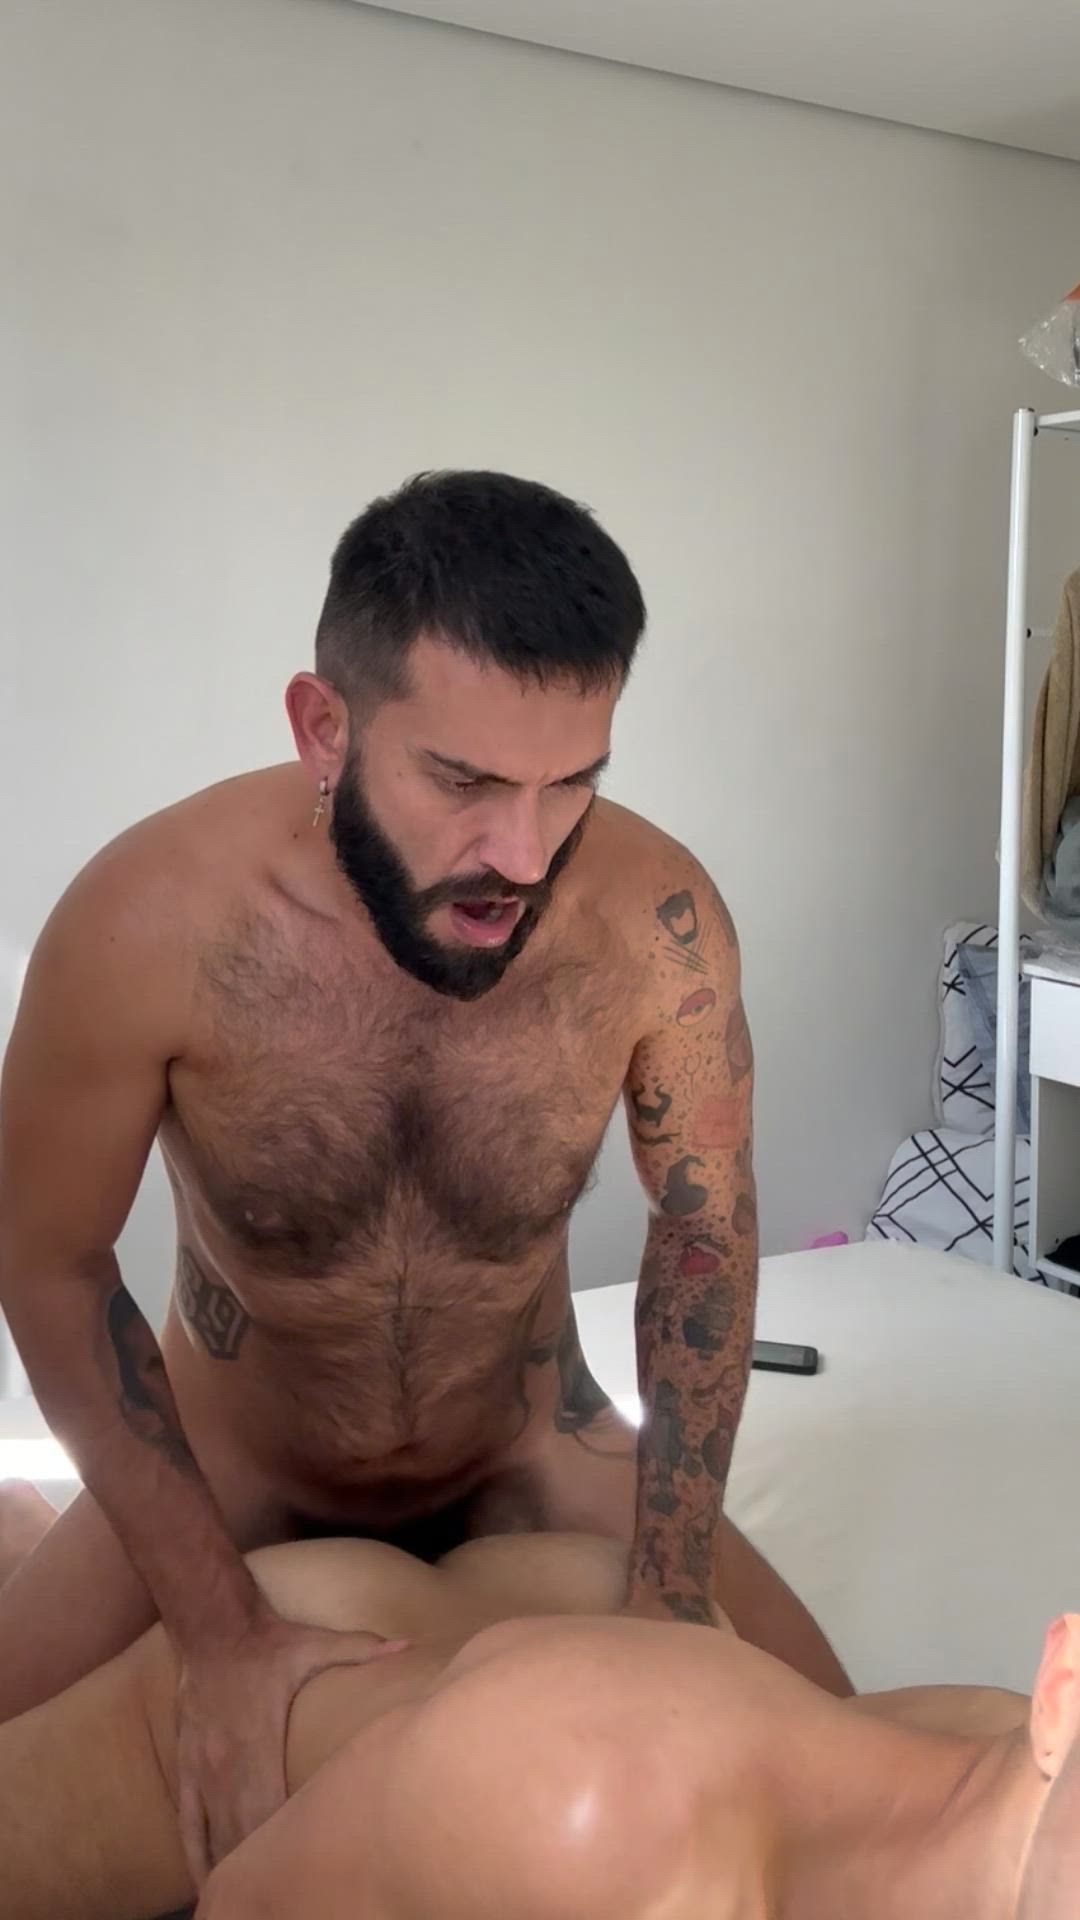 Amateur porn video with onlyfans model Mike Verine <strong>@xverine</strong>